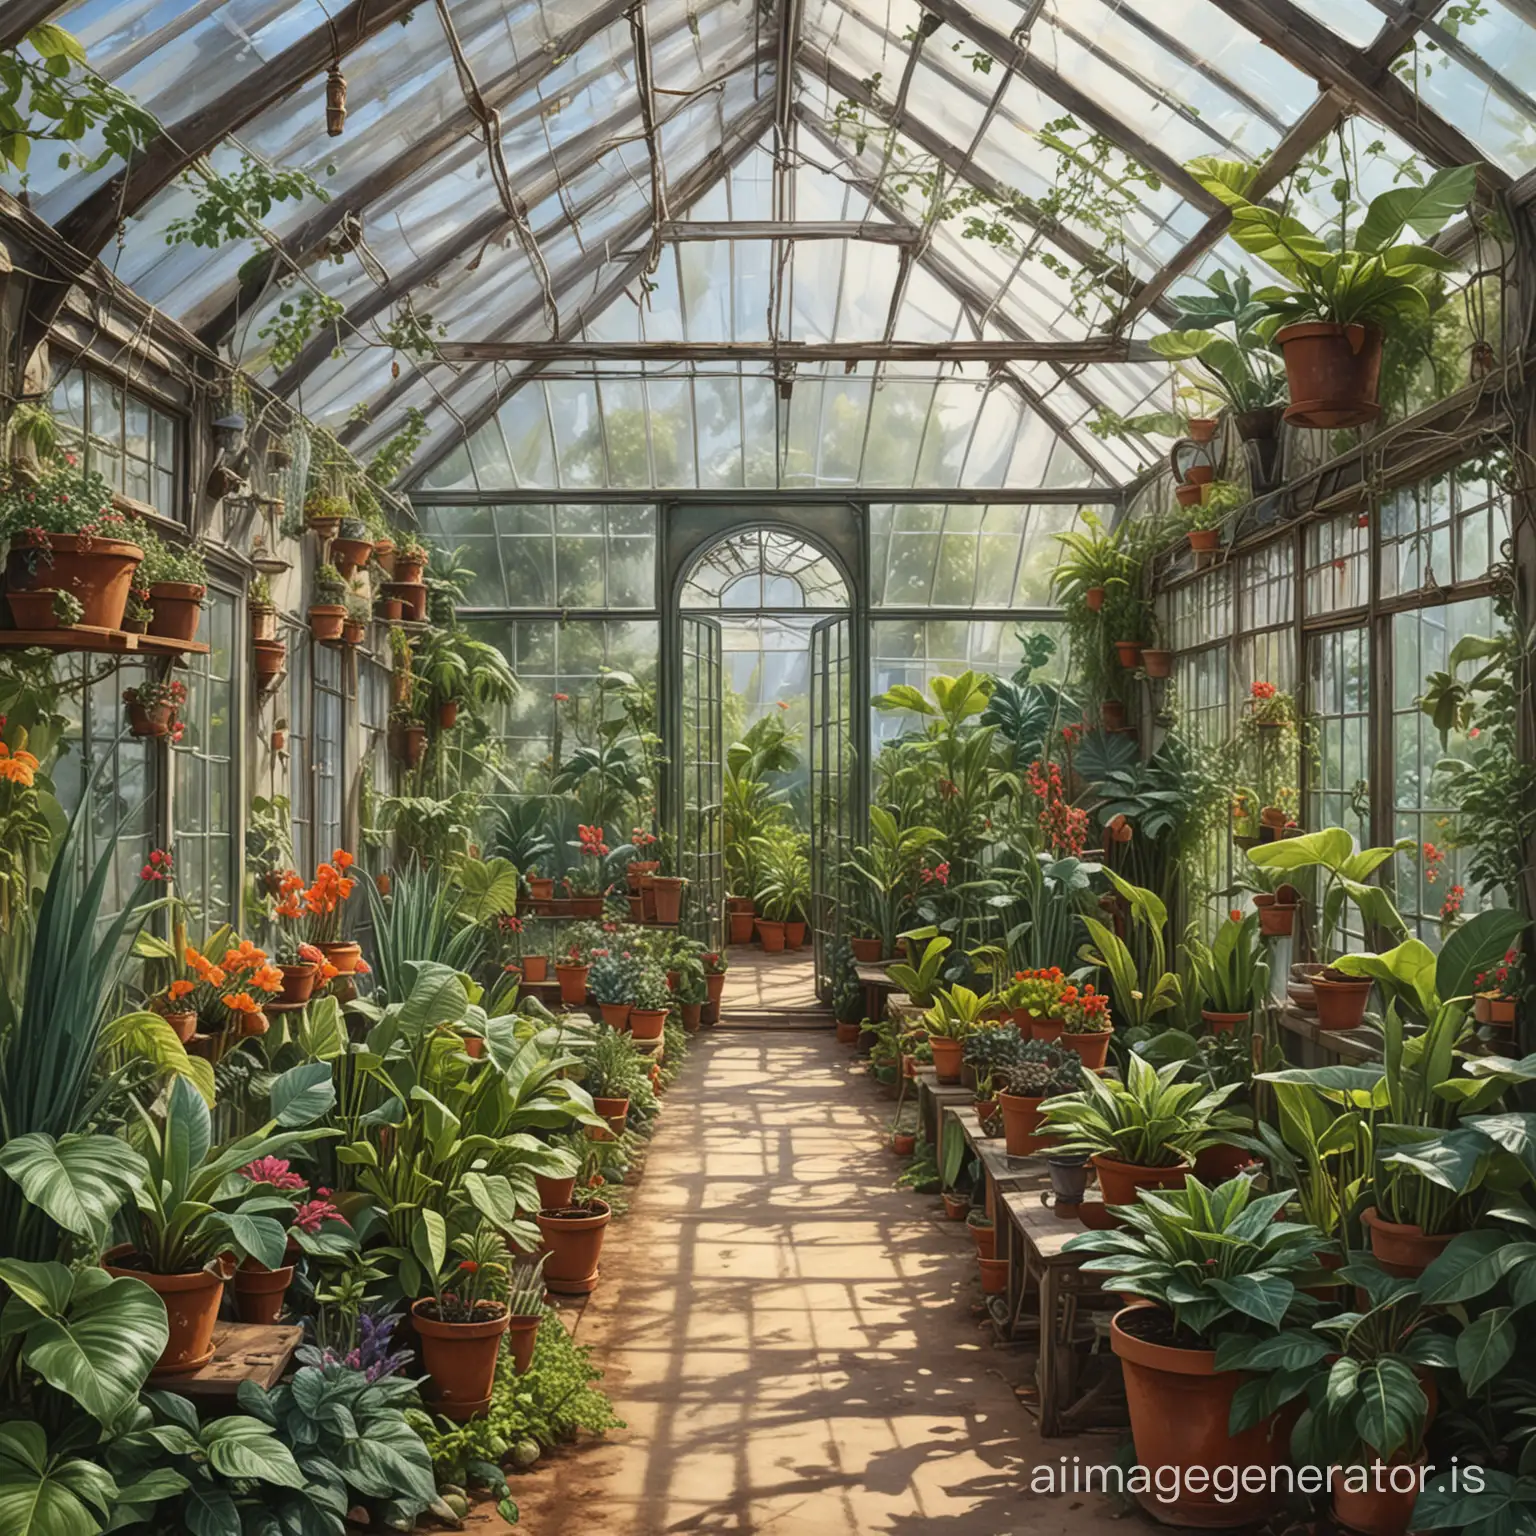 Enchanted-Greenhouse-Fantasy-Art-with-Exotic-Plants